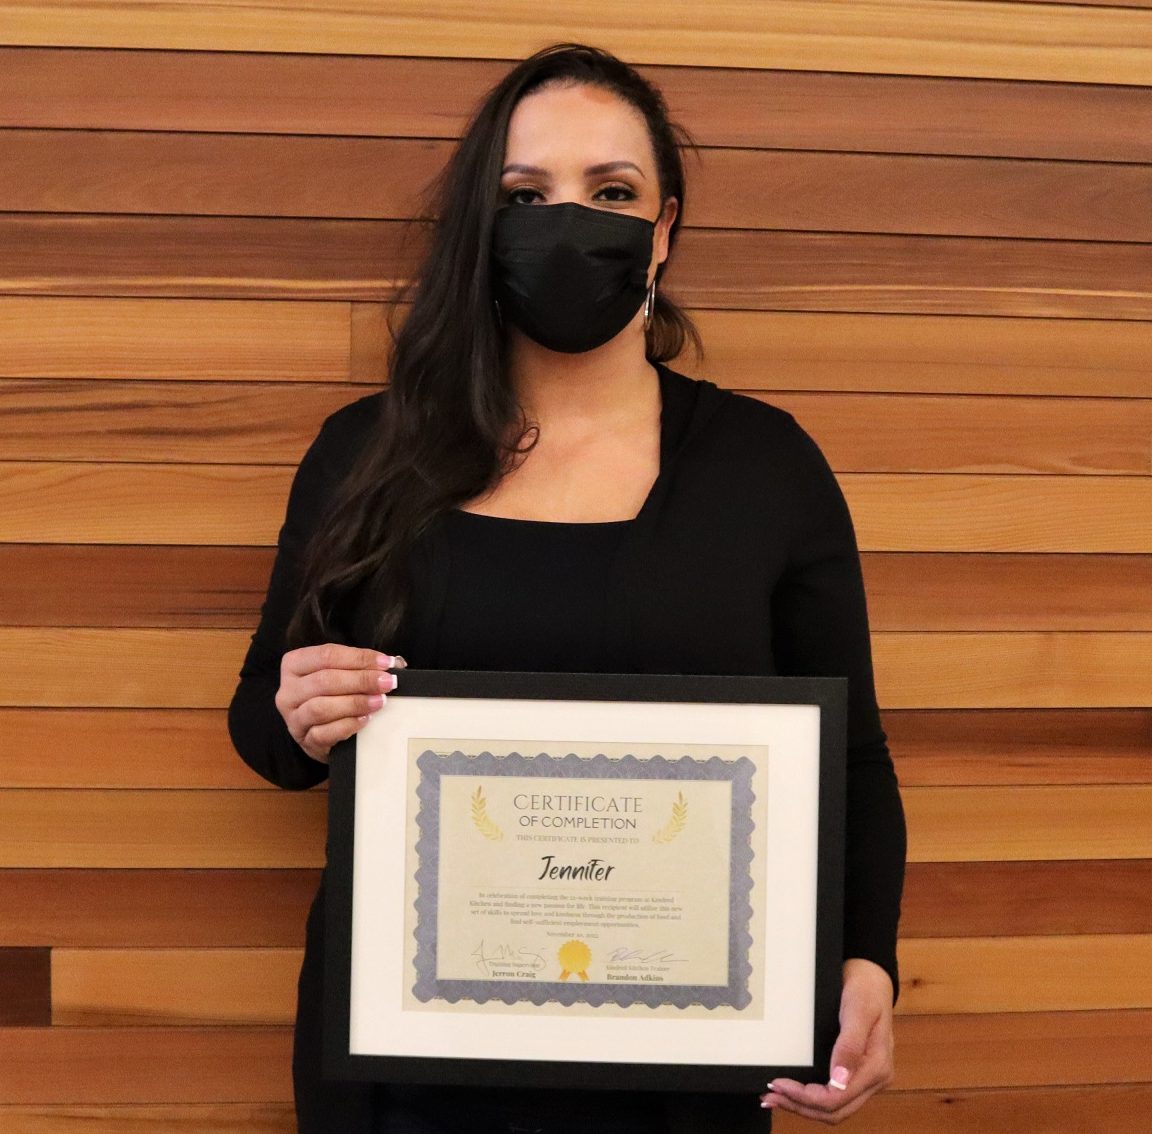 Photo of a woman in a black face mask looking at the camera, holding a graduation certificate.